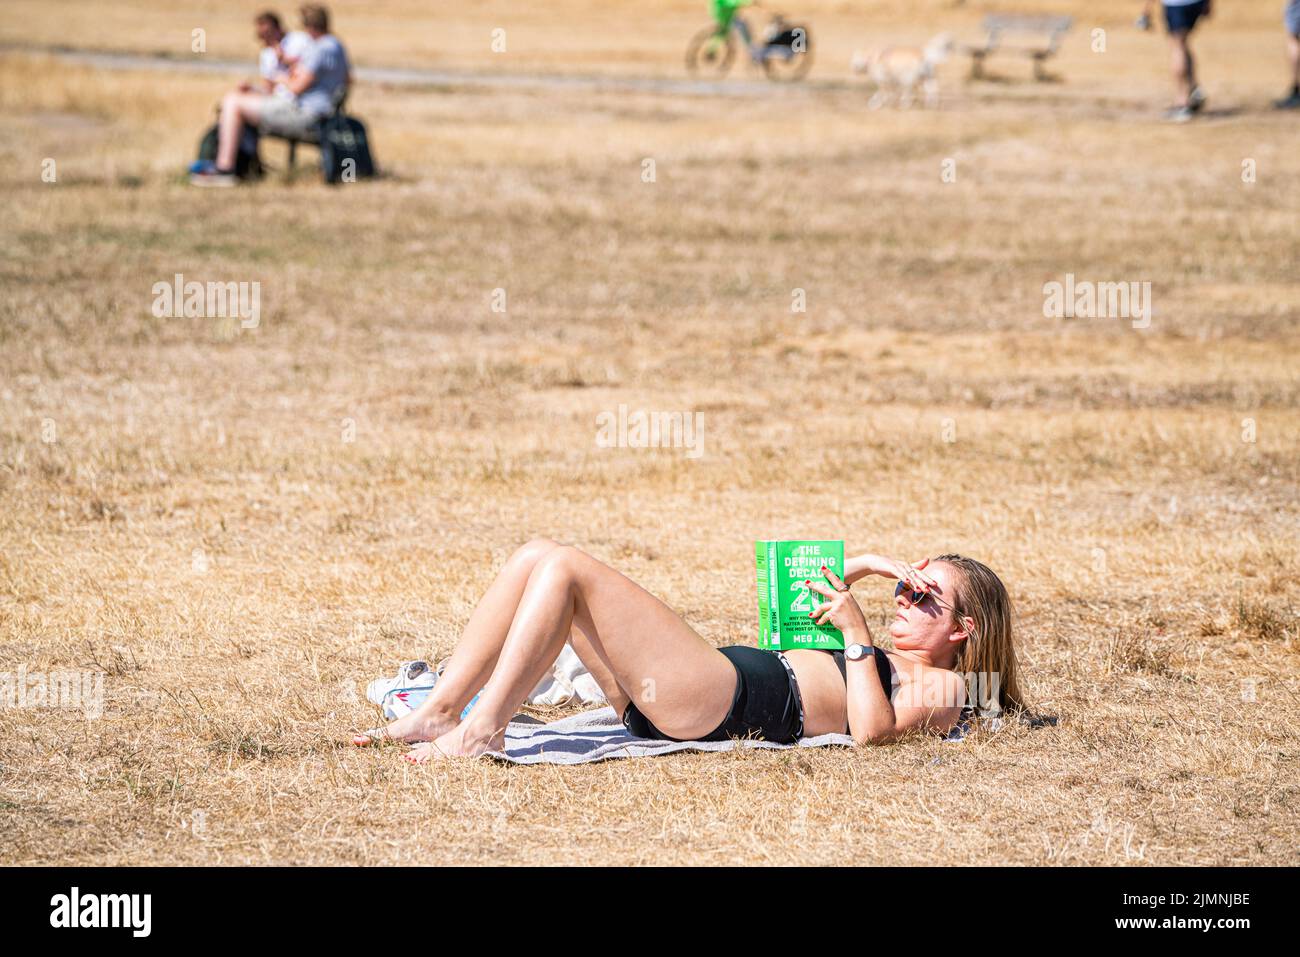 Wimbledon, London, UK. 7 August 2022  A woman  sunbathing on a hot day  on the parched grass on Wimbledon Common  on another  hot day  as the UK's heatwave and drought continues into August, with temperatures expected to reach  above 30celsius  by next week Credit. amer ghazzal/Alamy Live News Stock Photo